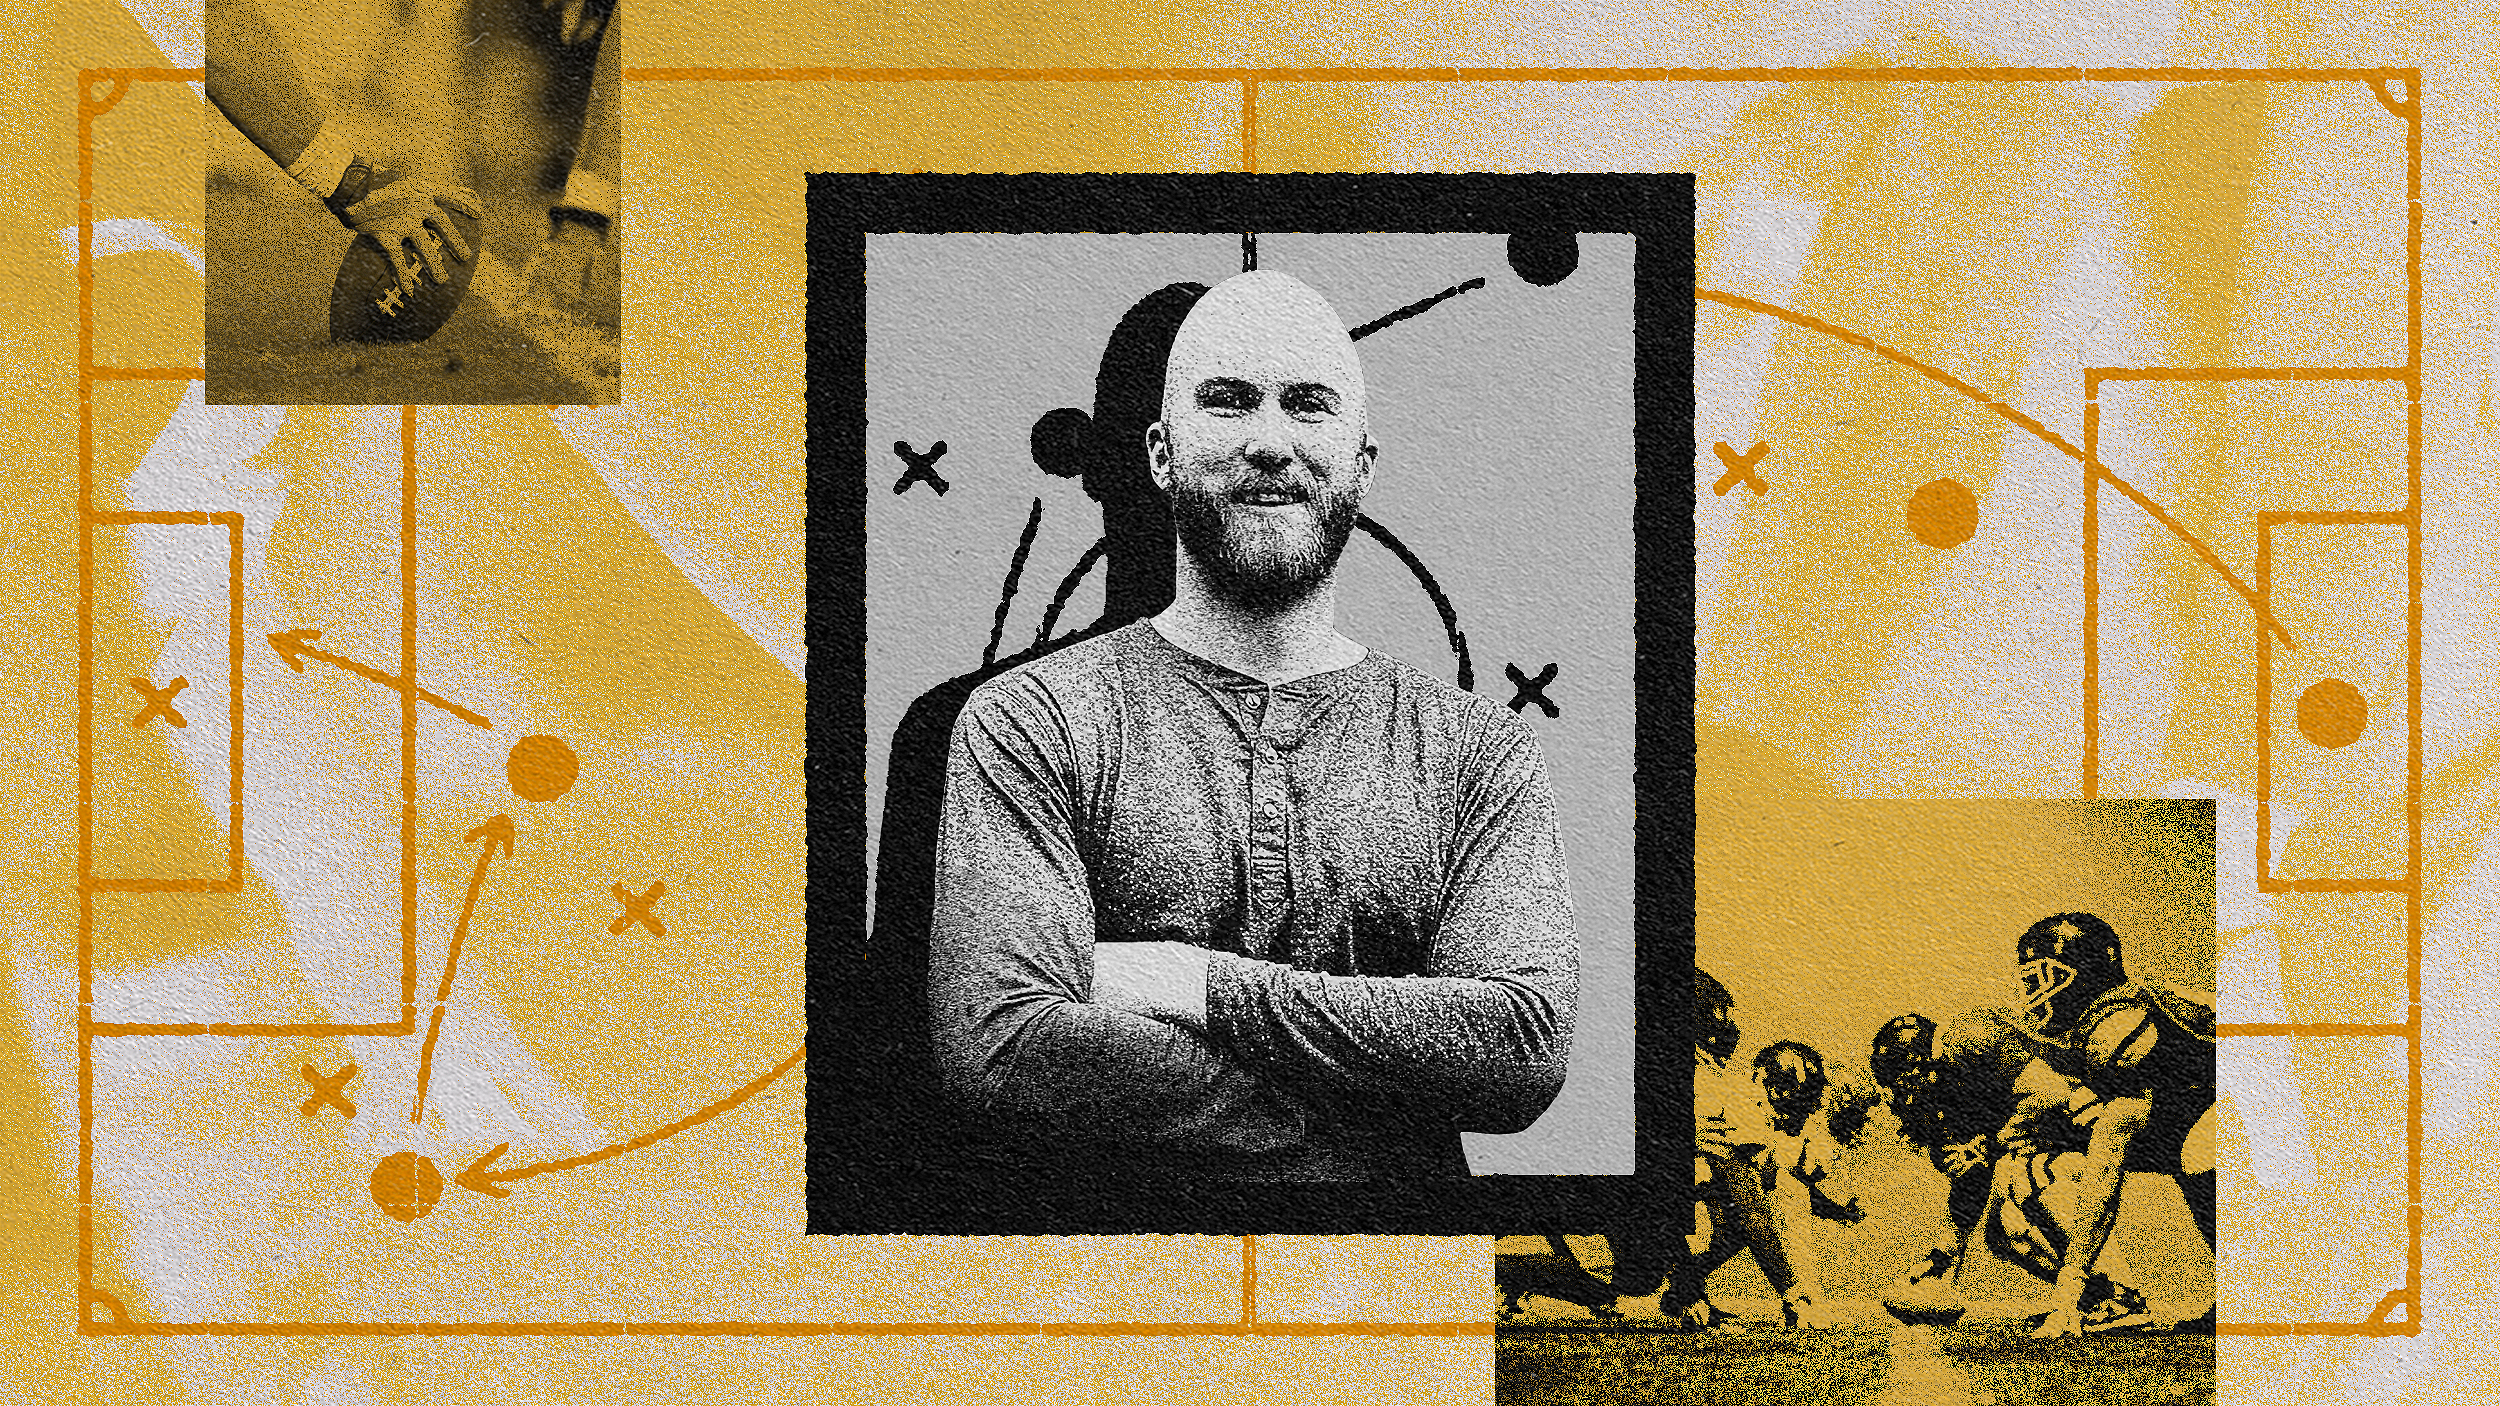 A collage featuring a central black and white image of a bearded man with crossed arms, representing AI startup leadership, surrounded by smaller images and diagrams related to football, all set against an orange textured background